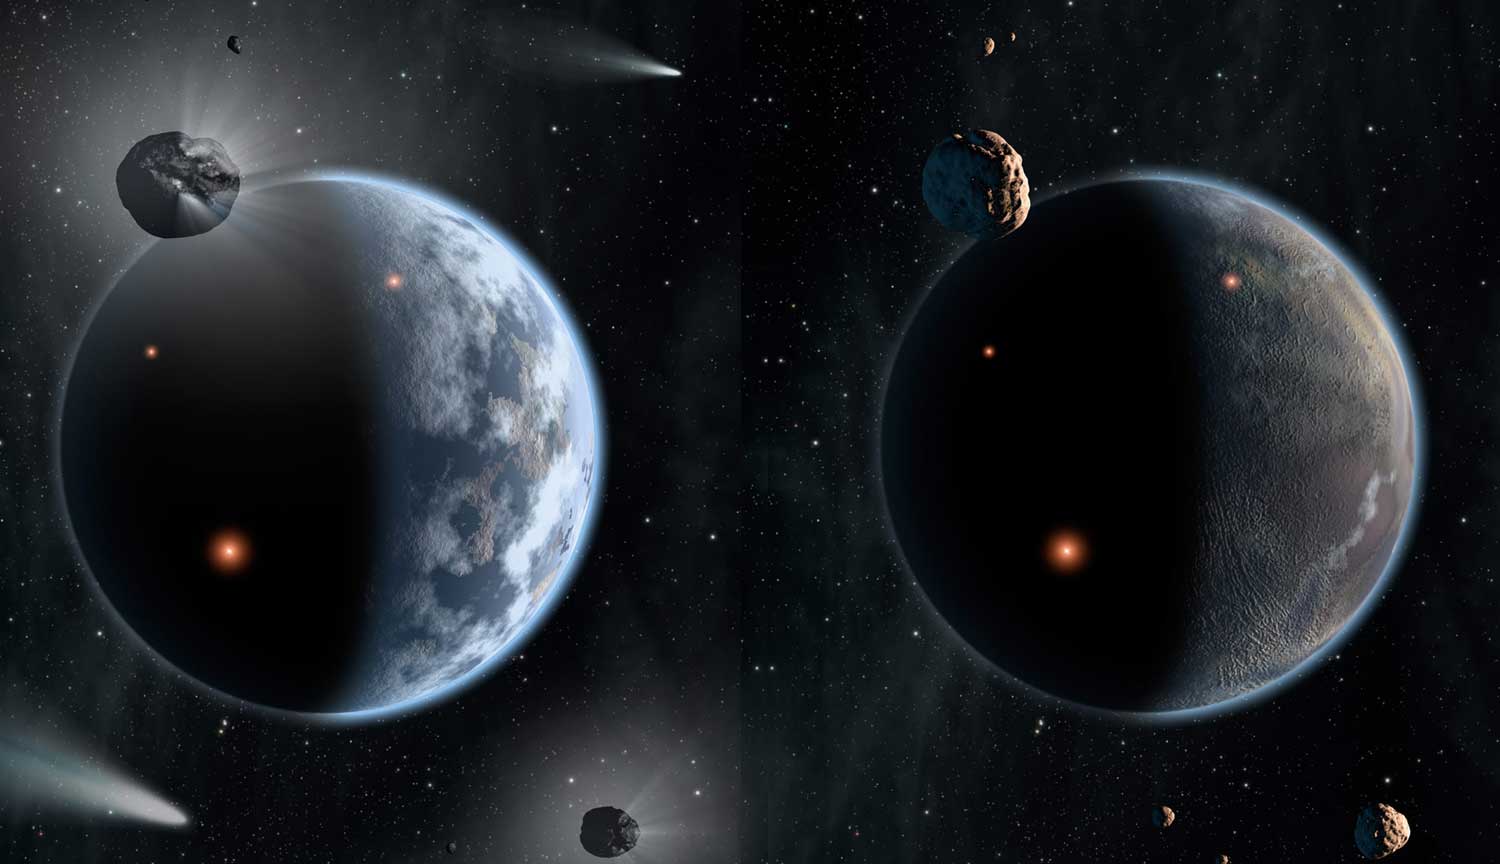 Astrophysicists confirmed that carbide exoplanets could be made of diamonds